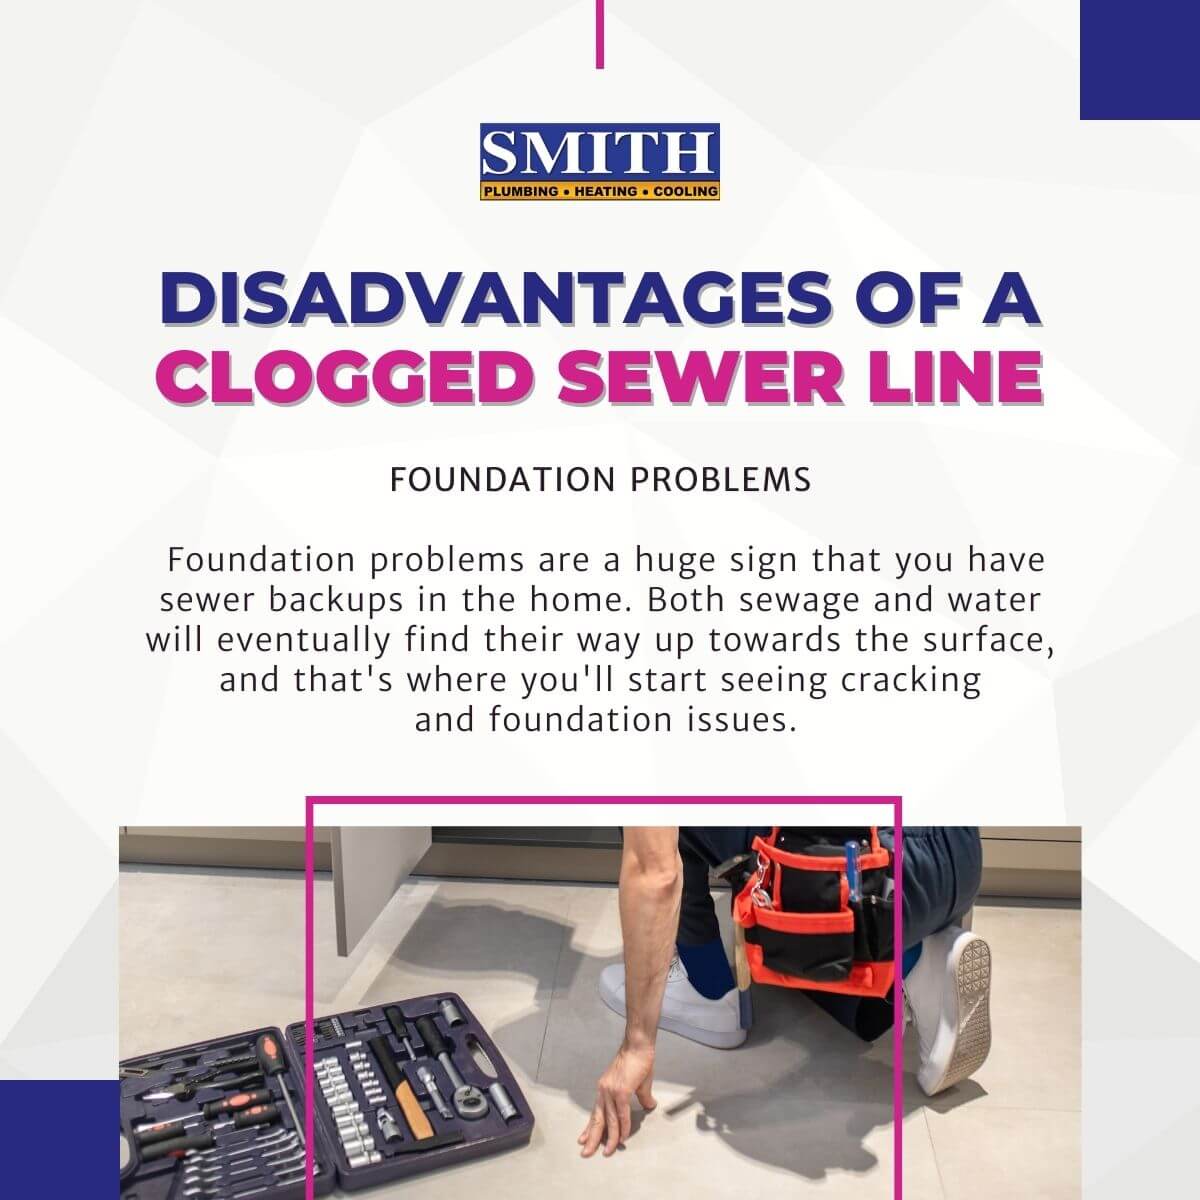 Disadvantages of a clogged sewer line page 7